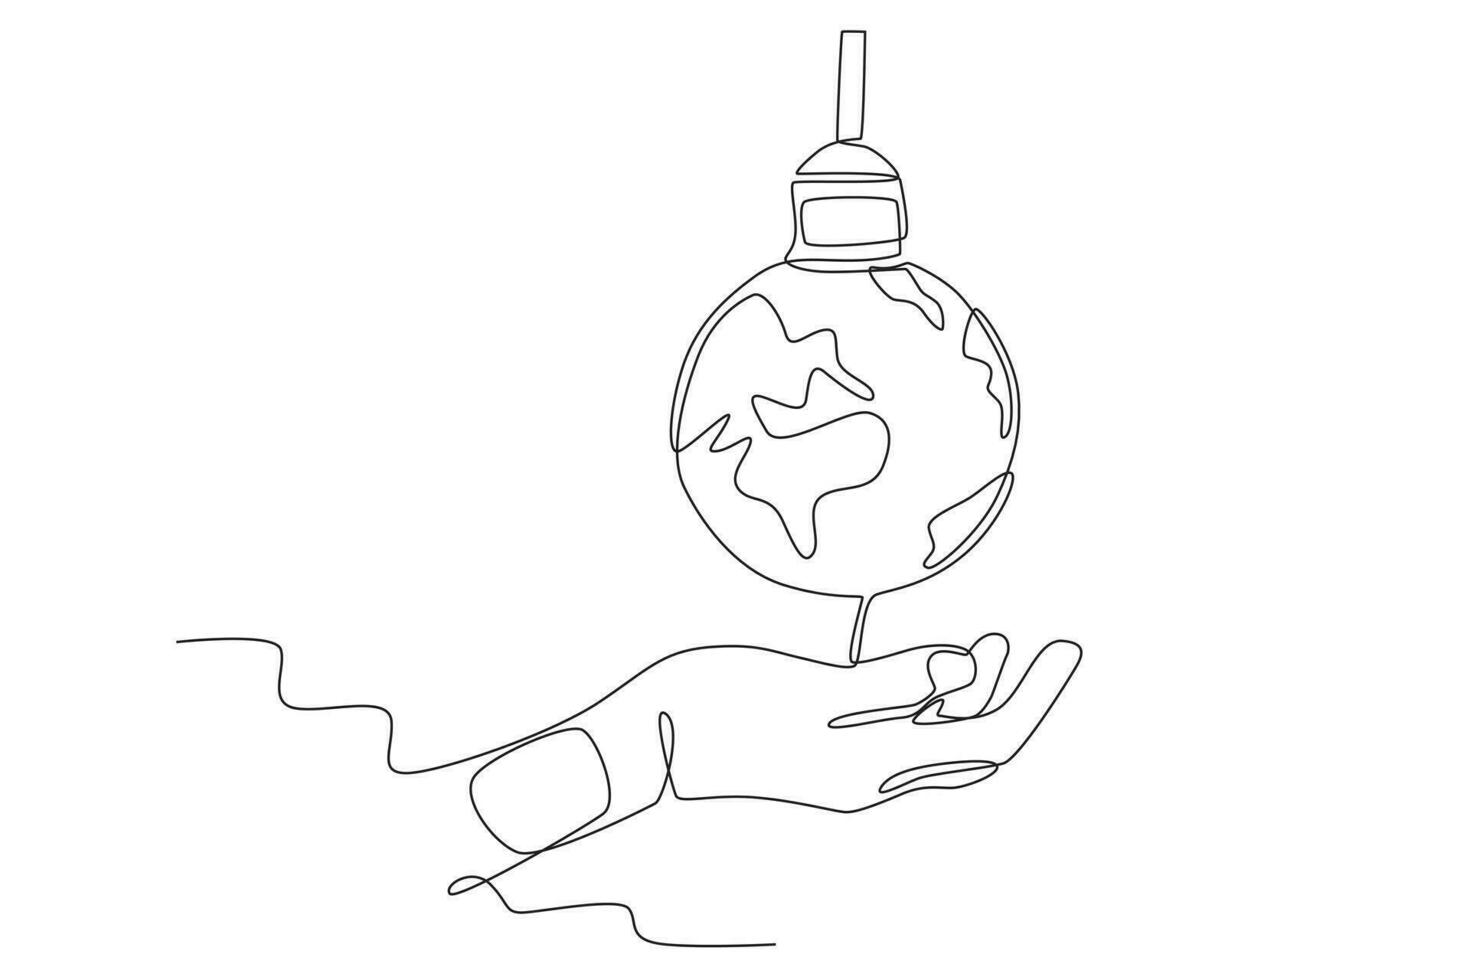 Turn off lights to save the earth vector